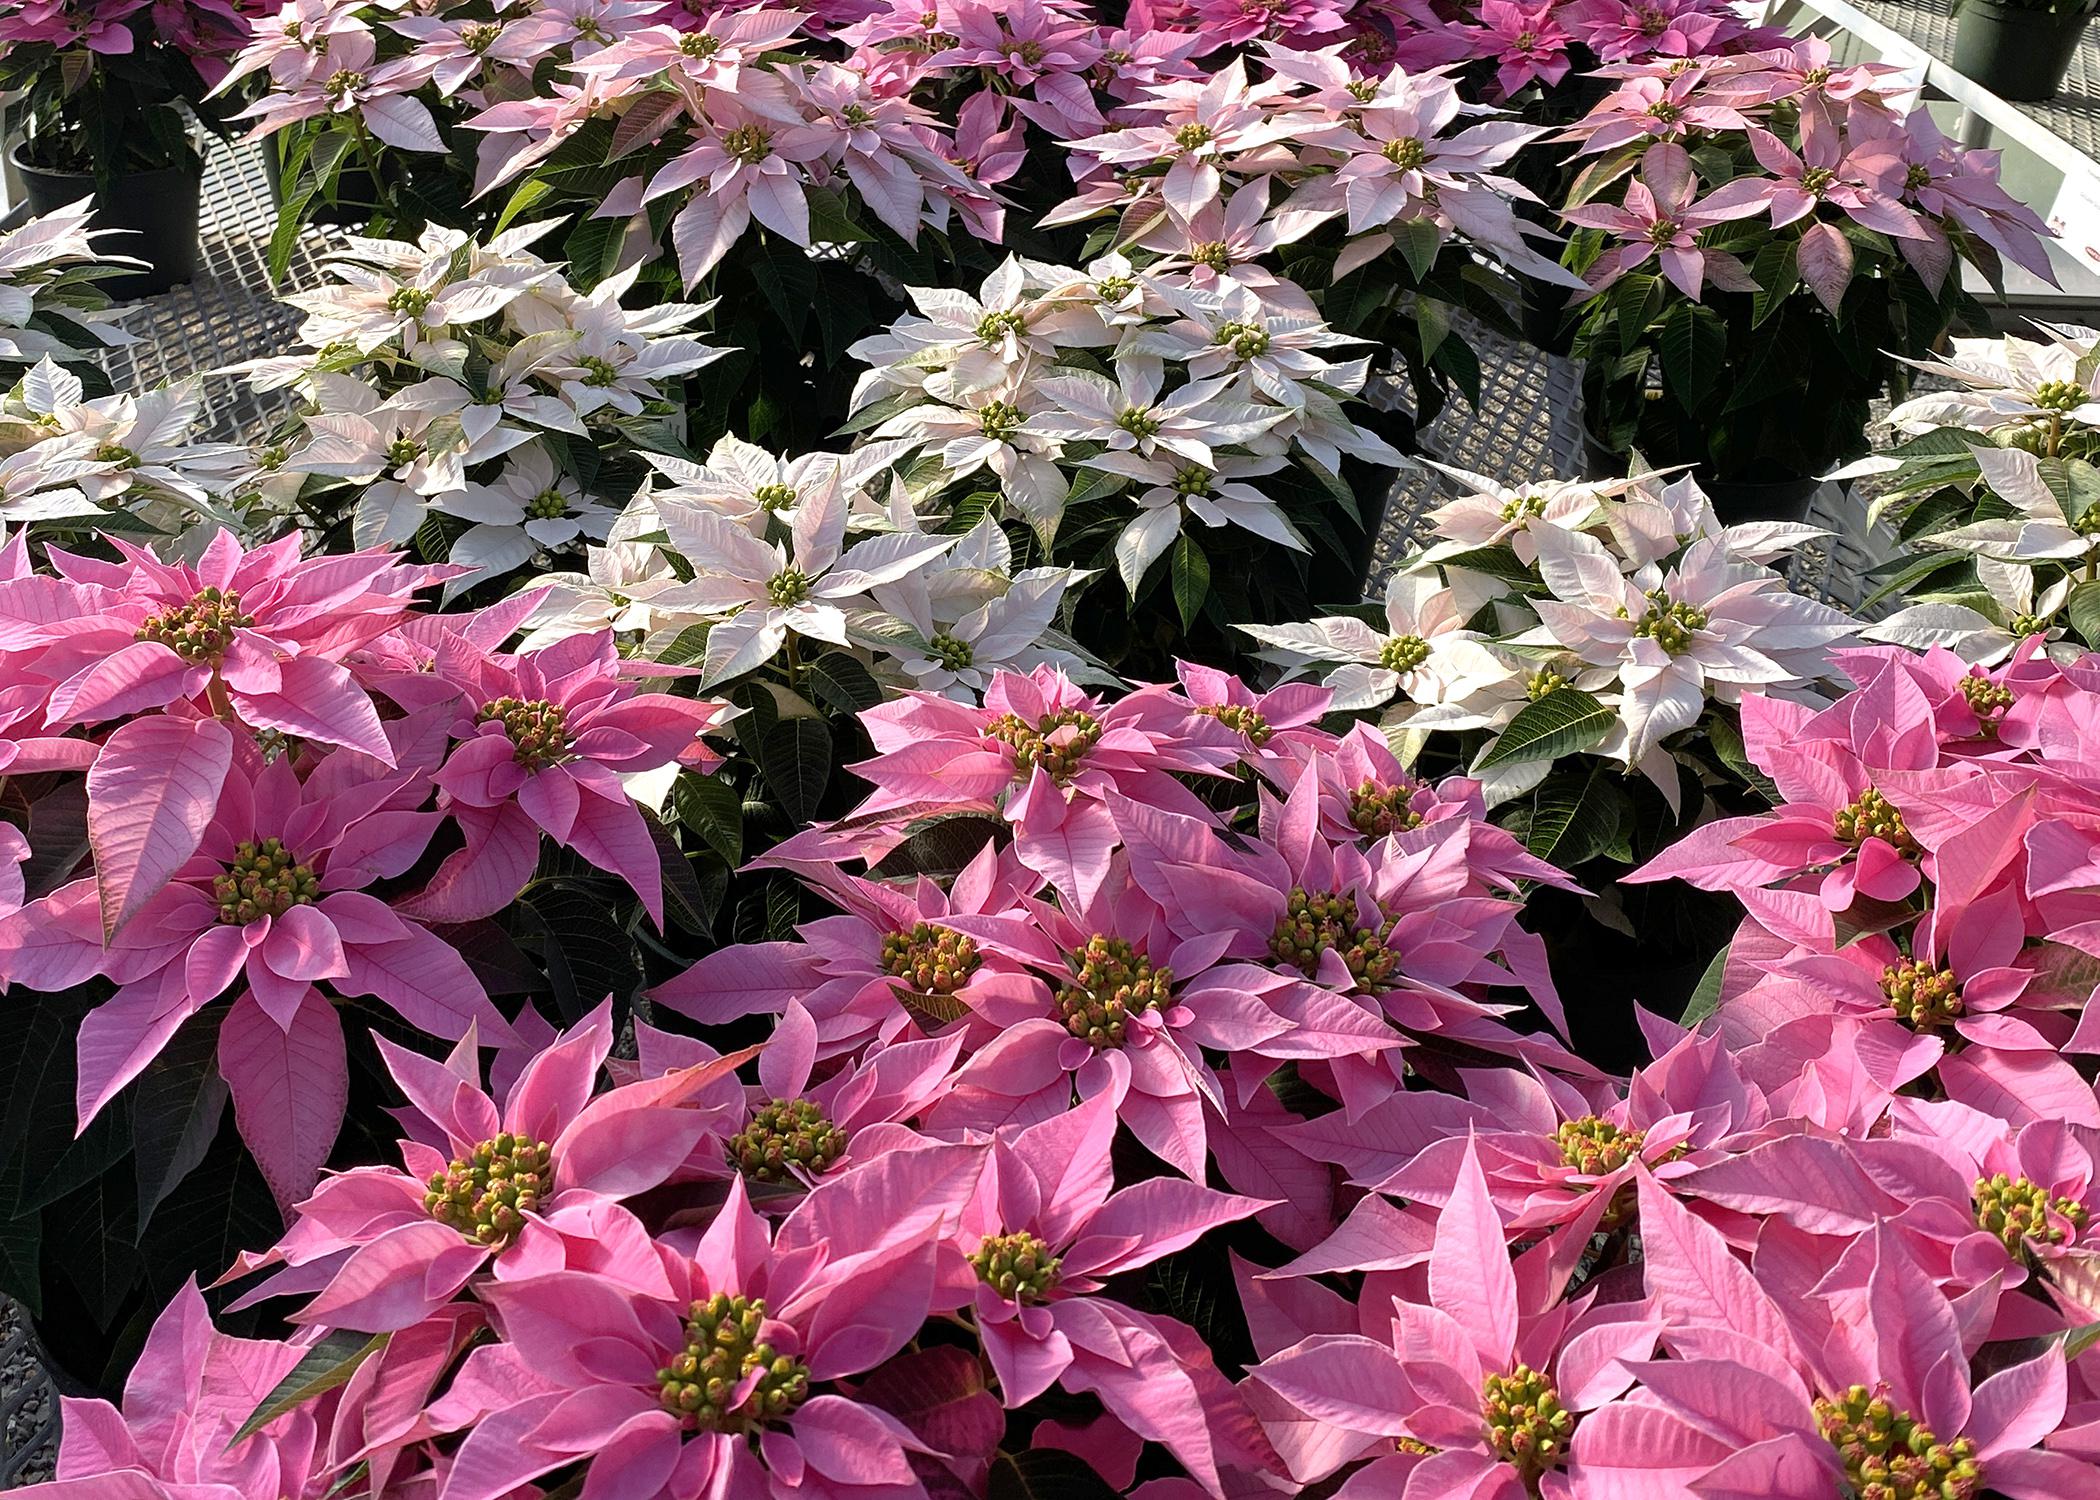 These poinsettias have white or pink bracts.